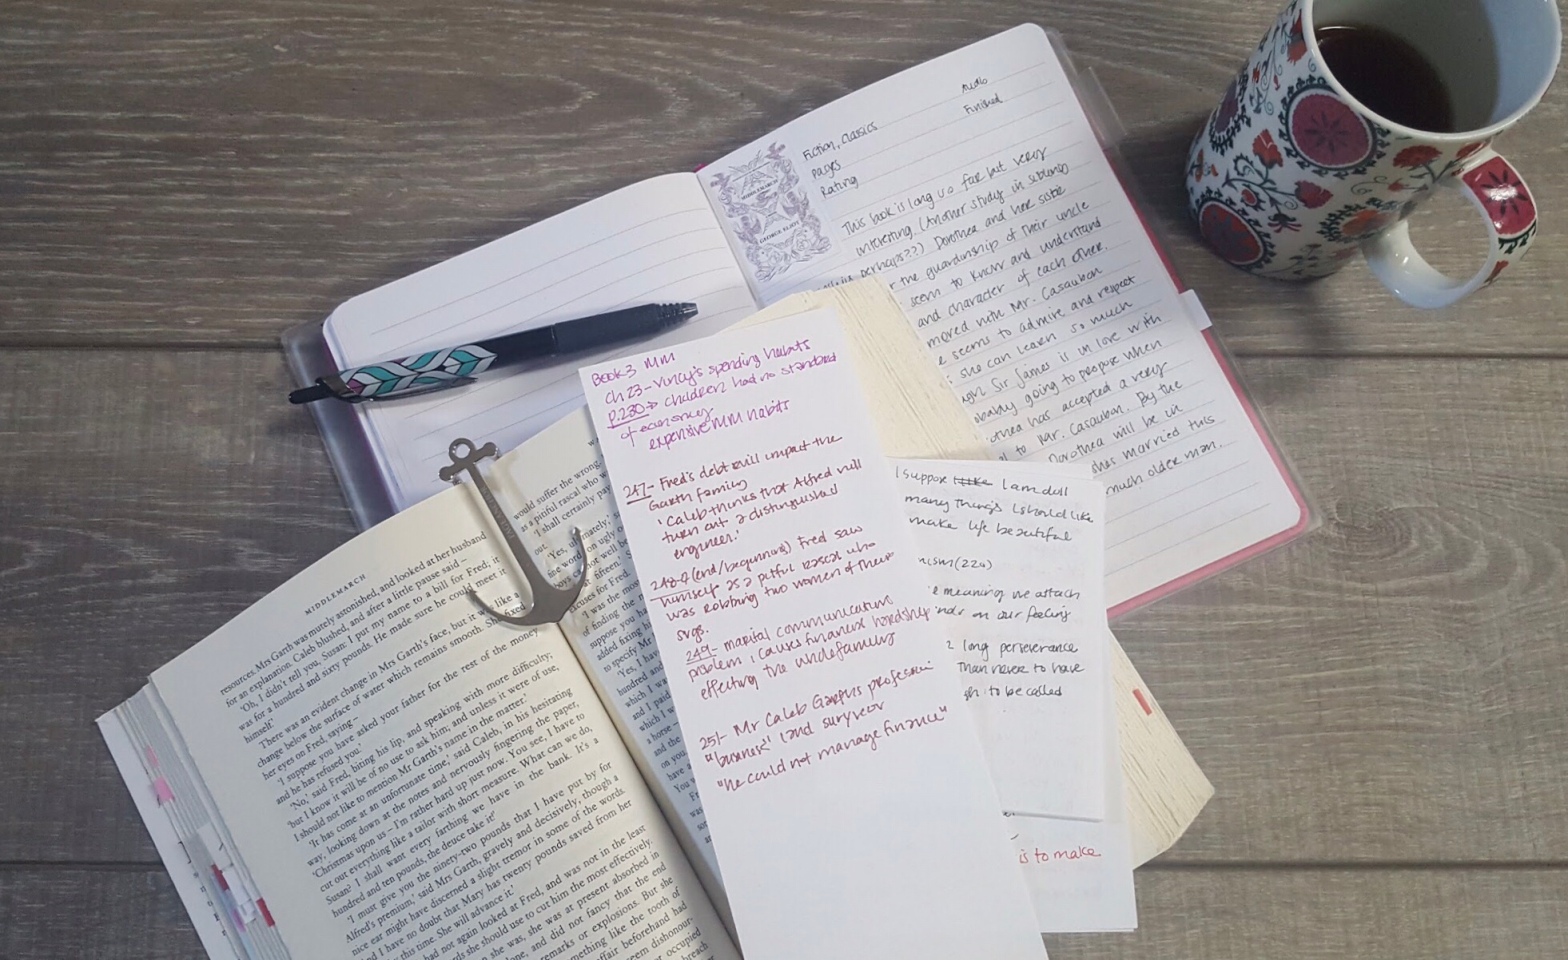 To annotate or not to annotate? – Books By the Cup